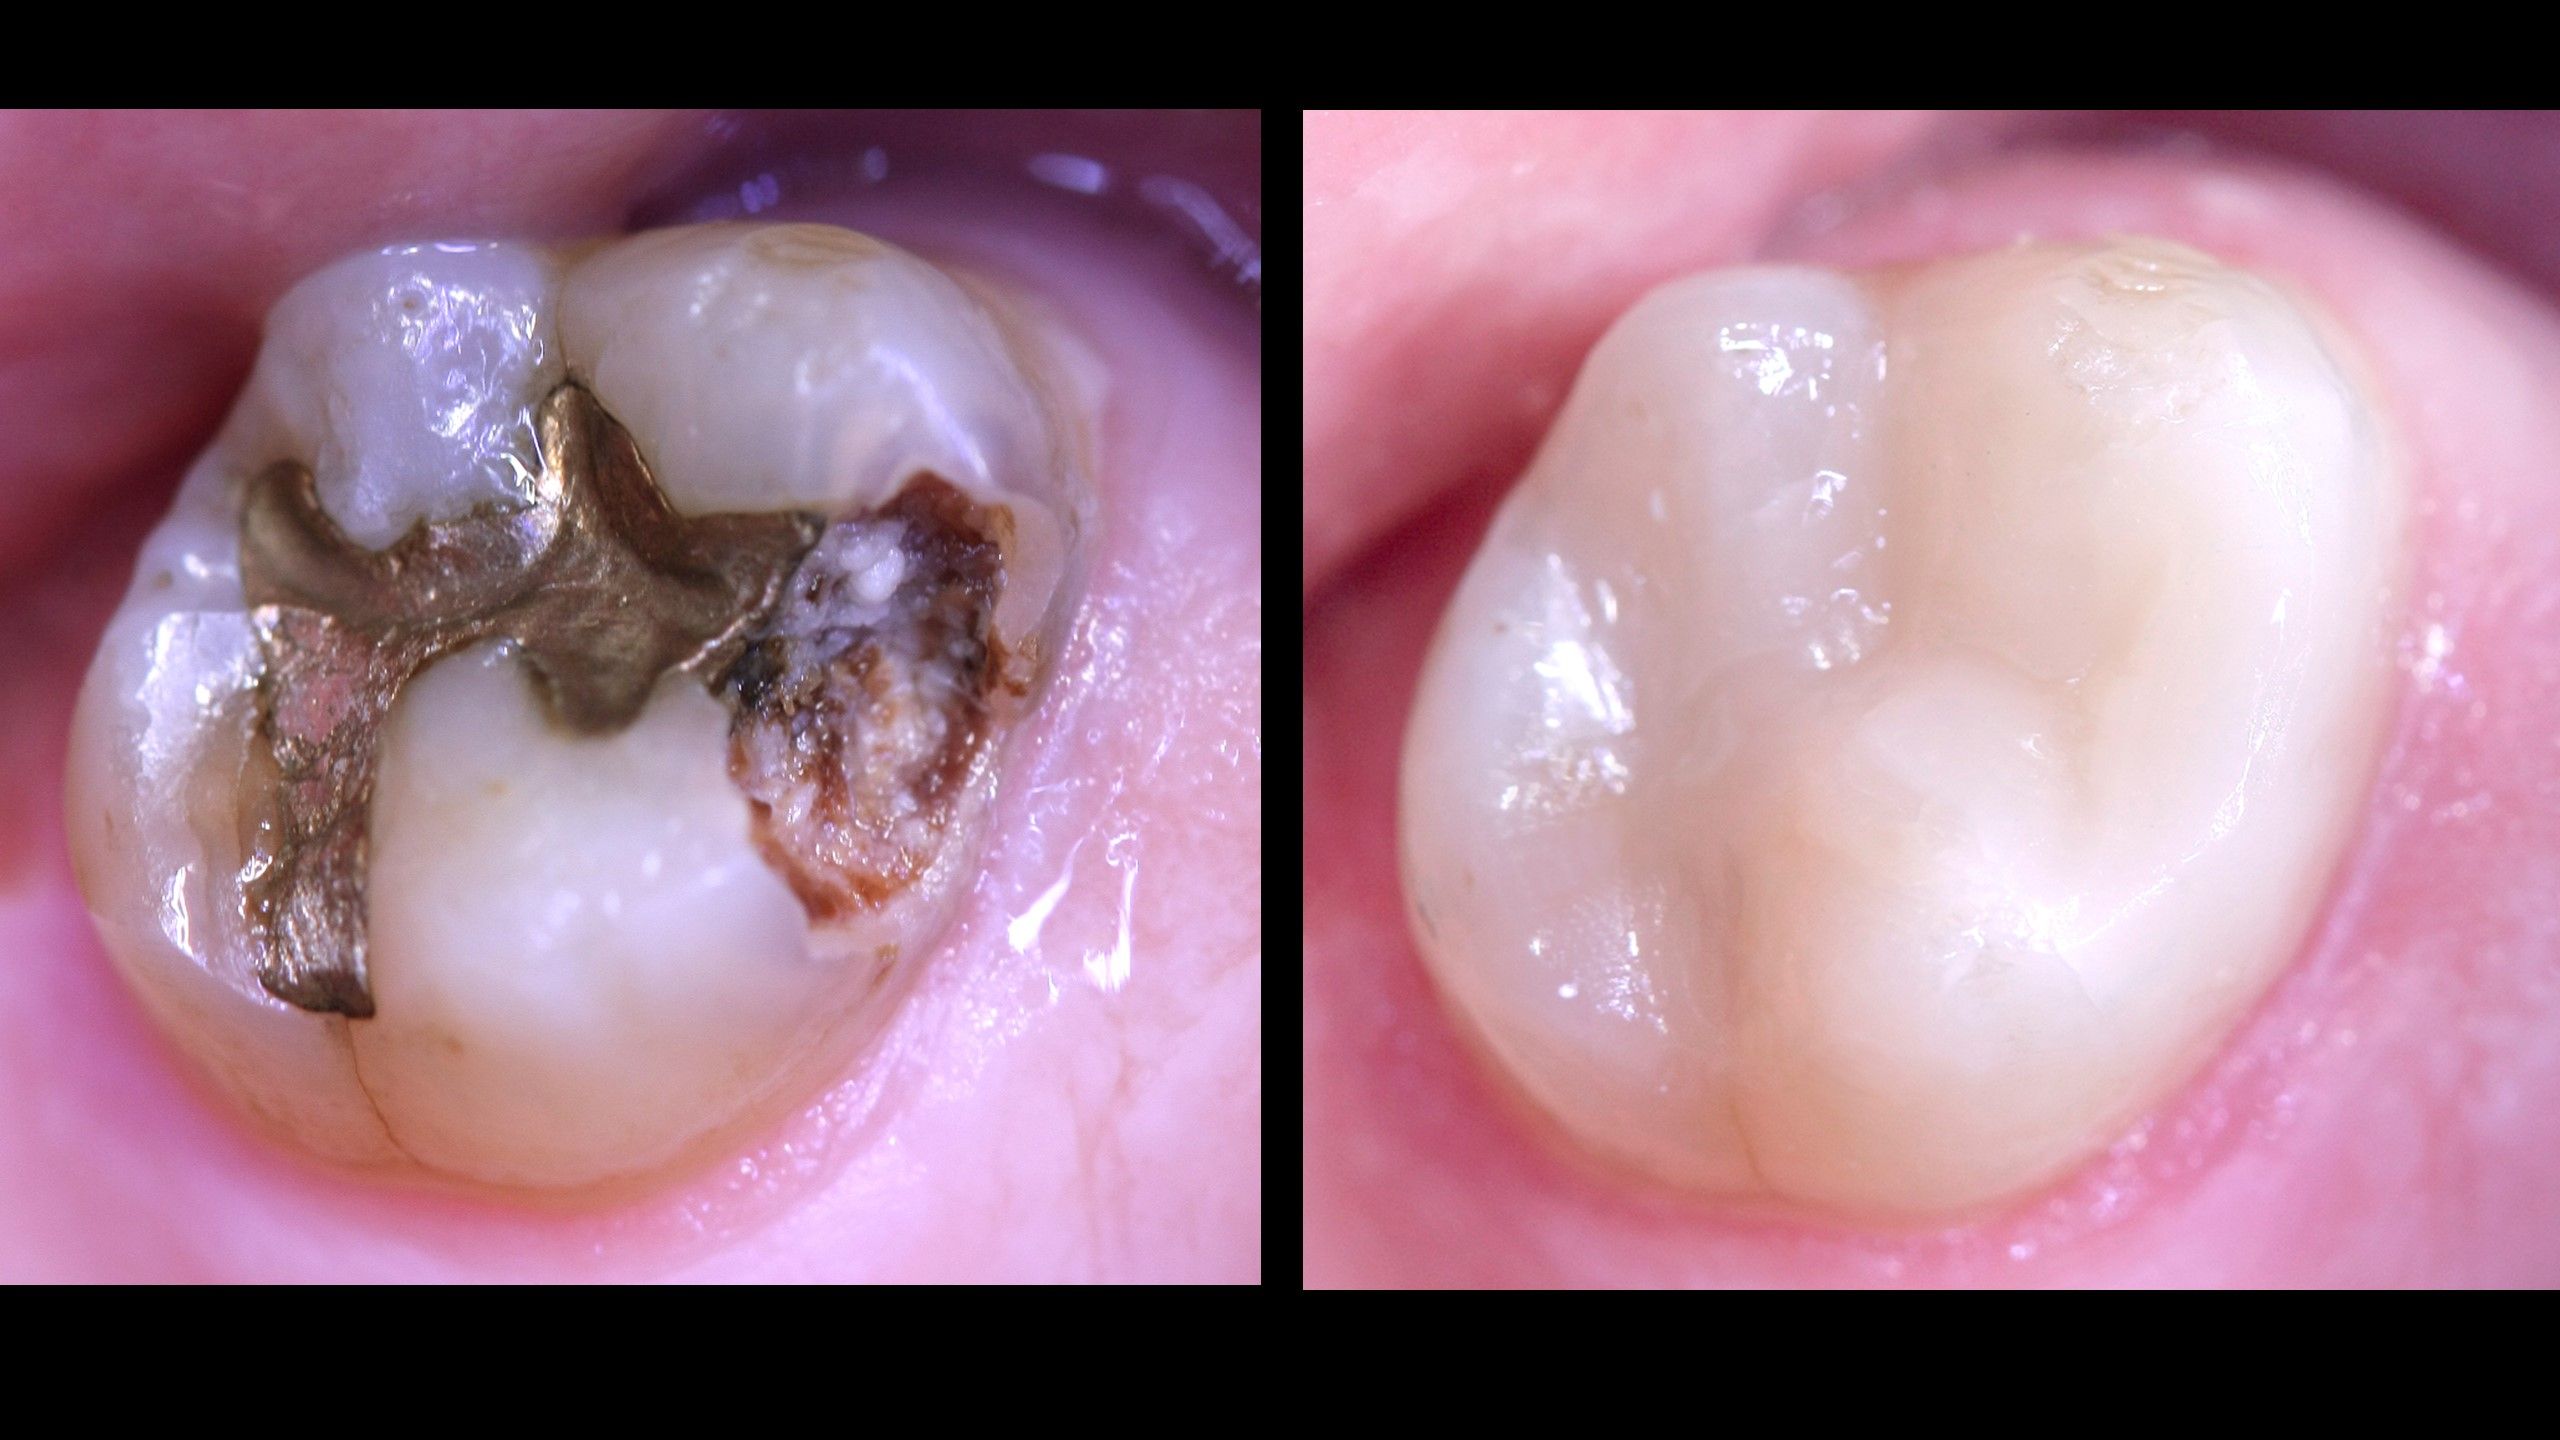 Amalgam removal treatment, old metal fillings in Padrós dental clinic. Your dentist in Barcelona